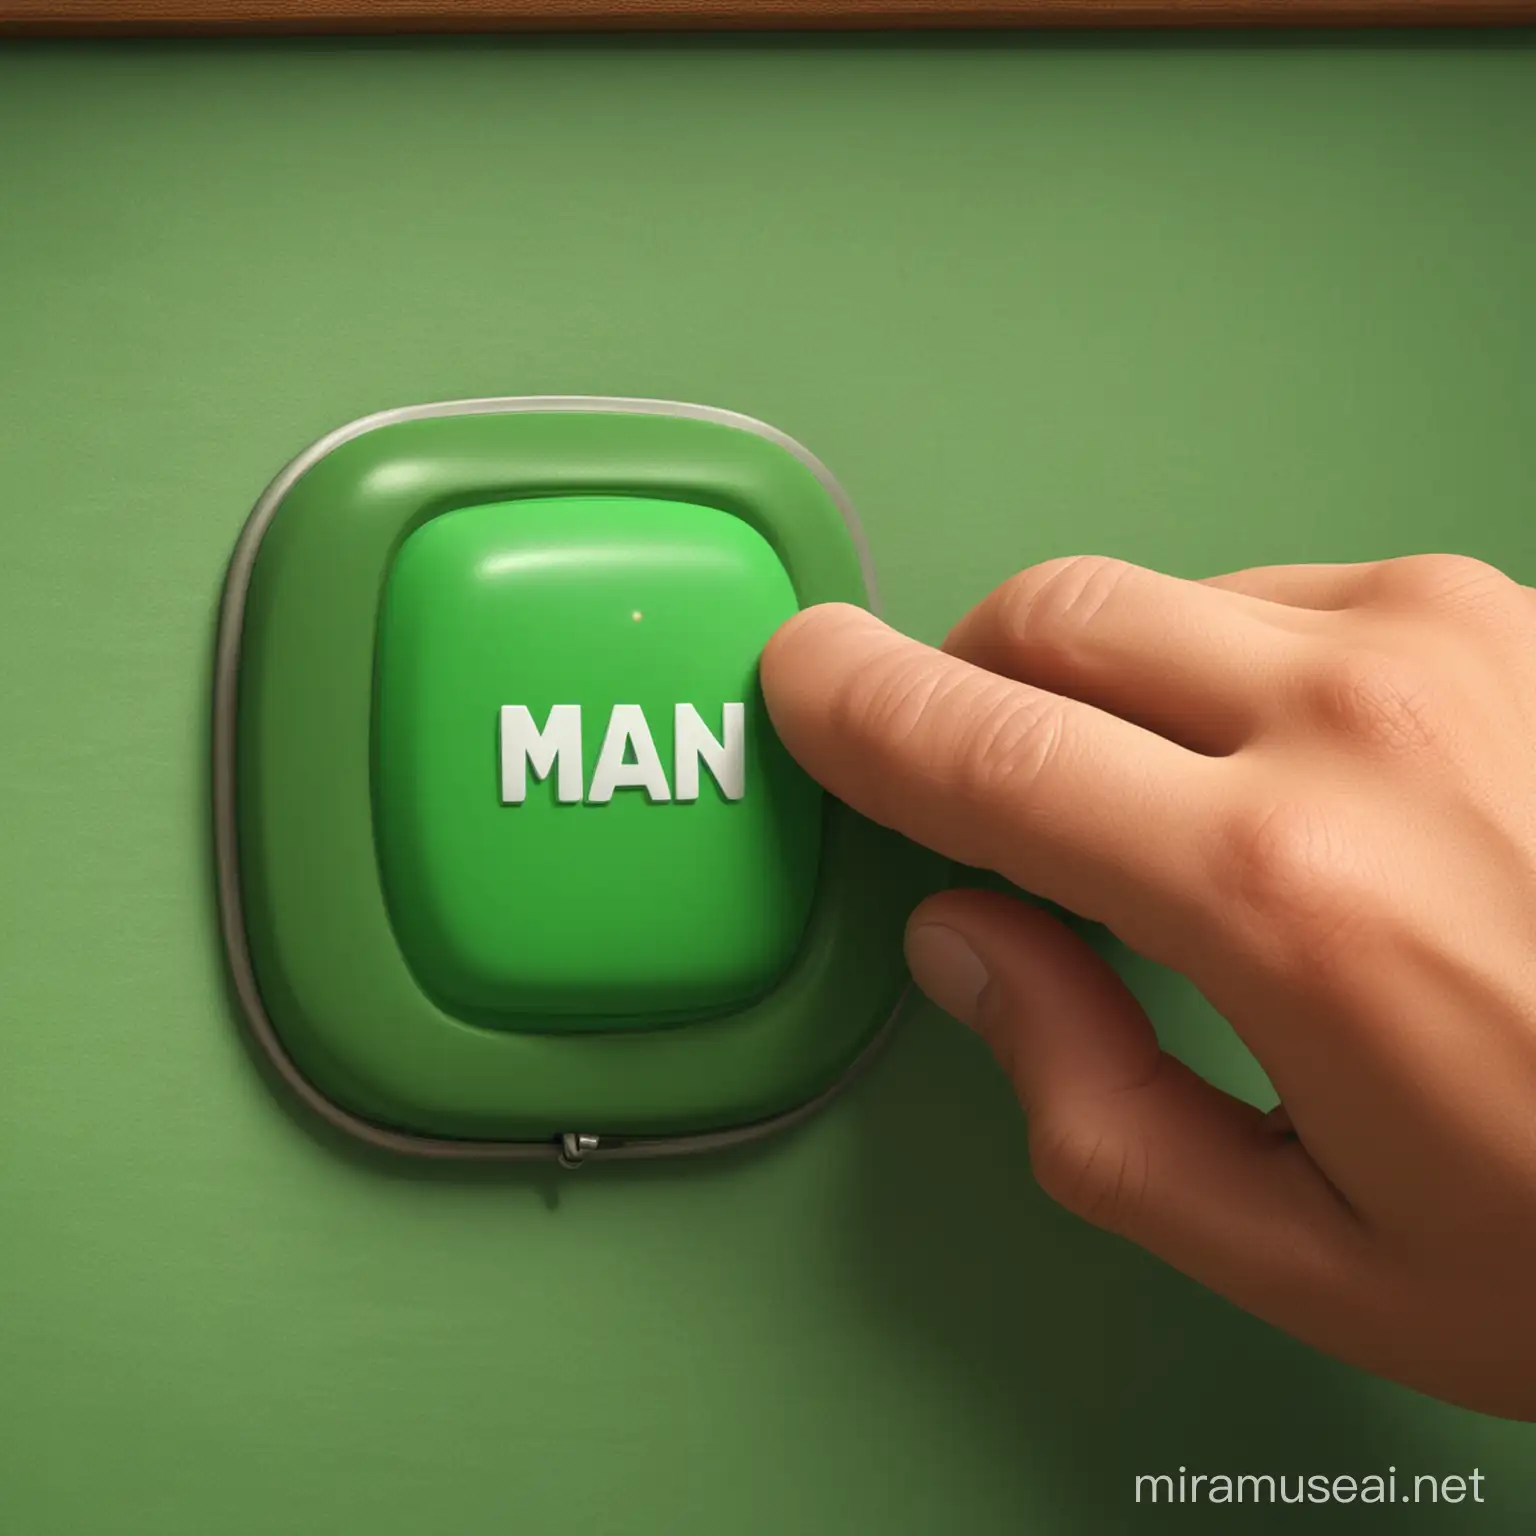 the man touch the green button ,disney pixar style